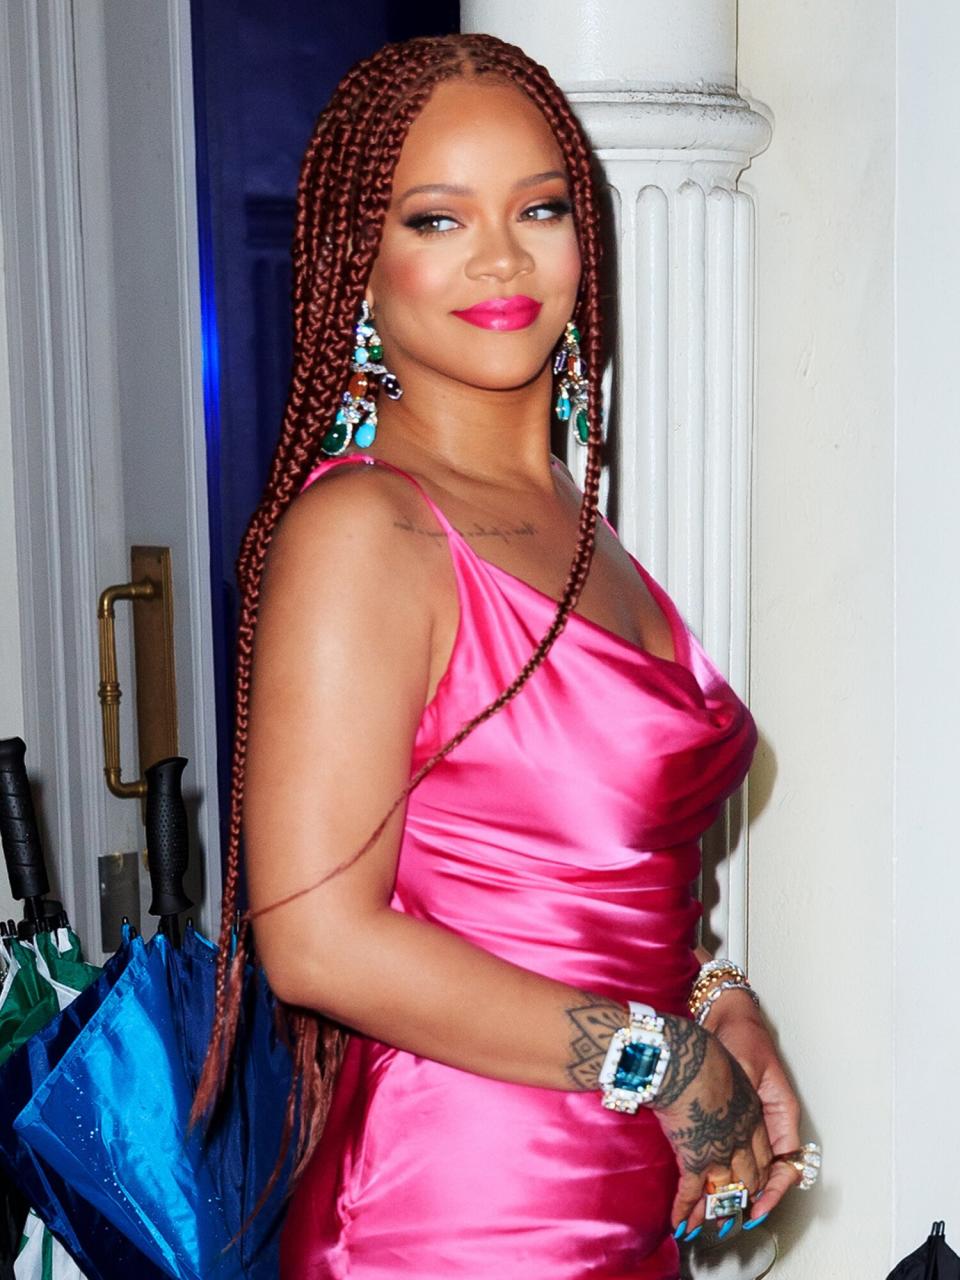 Rihanna wears a hot pink dress when arriving at a Fenty event on June 18, 2019 in New York City